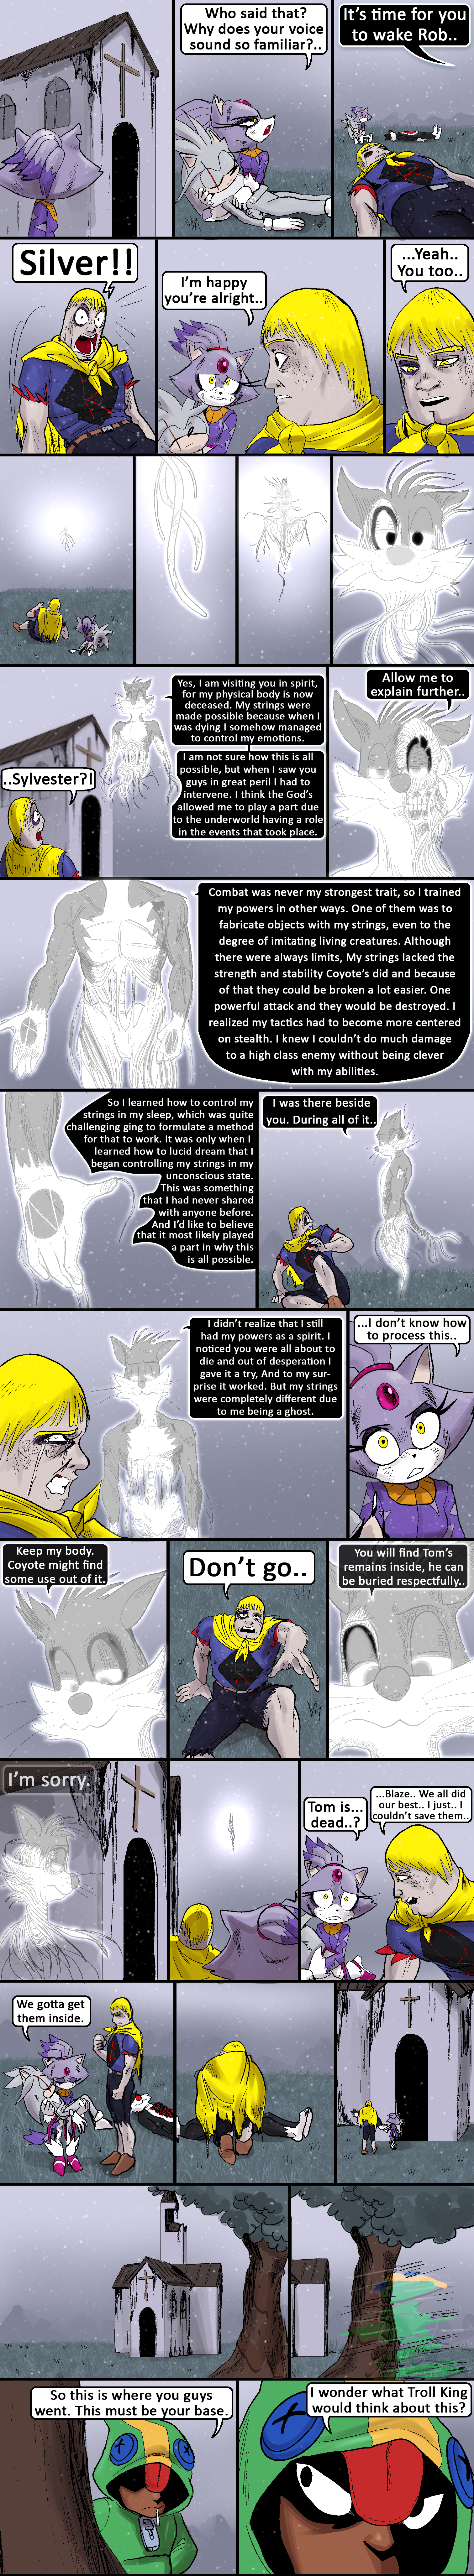 ch26/pg35.png. If you're seeing this, enable images. If you have them enabled, email commodorian@tailsgetstrolled.org with a detailed description of how you got here. (Screenshots help!)